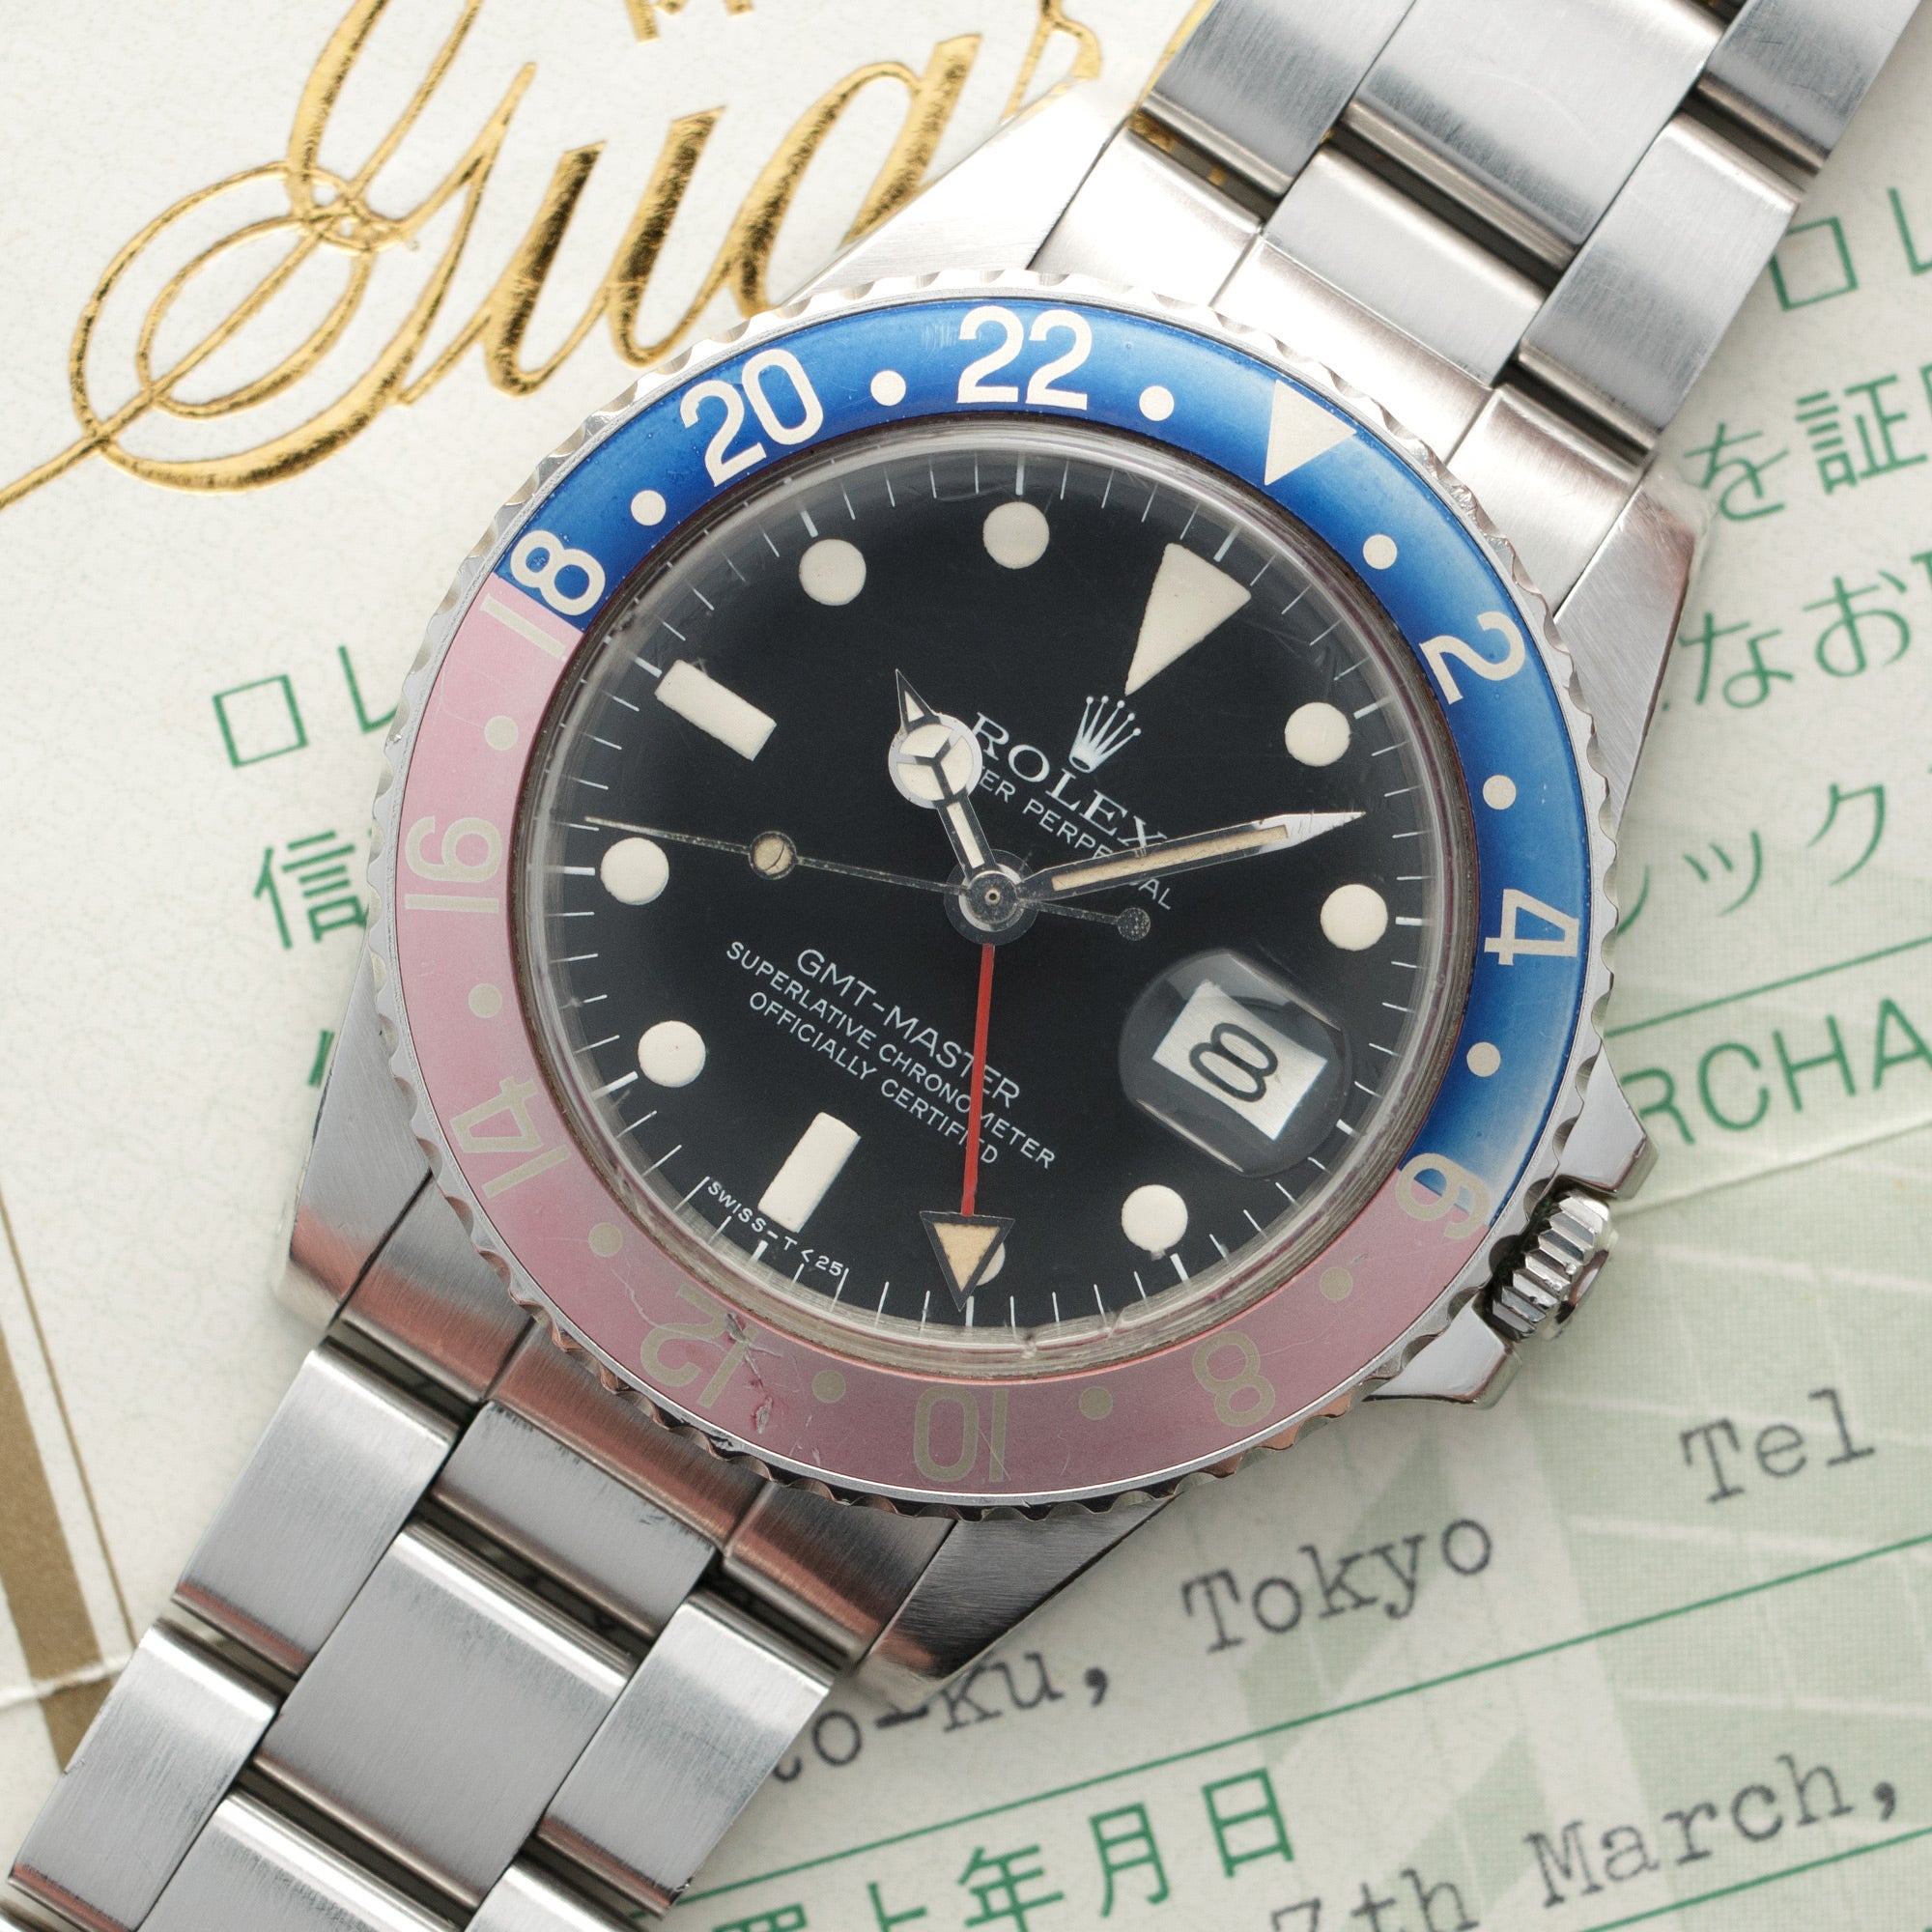 Rolex - Rolex GMT-Master Watch Ref. 1675, with Original Papers - The Keystone Watches